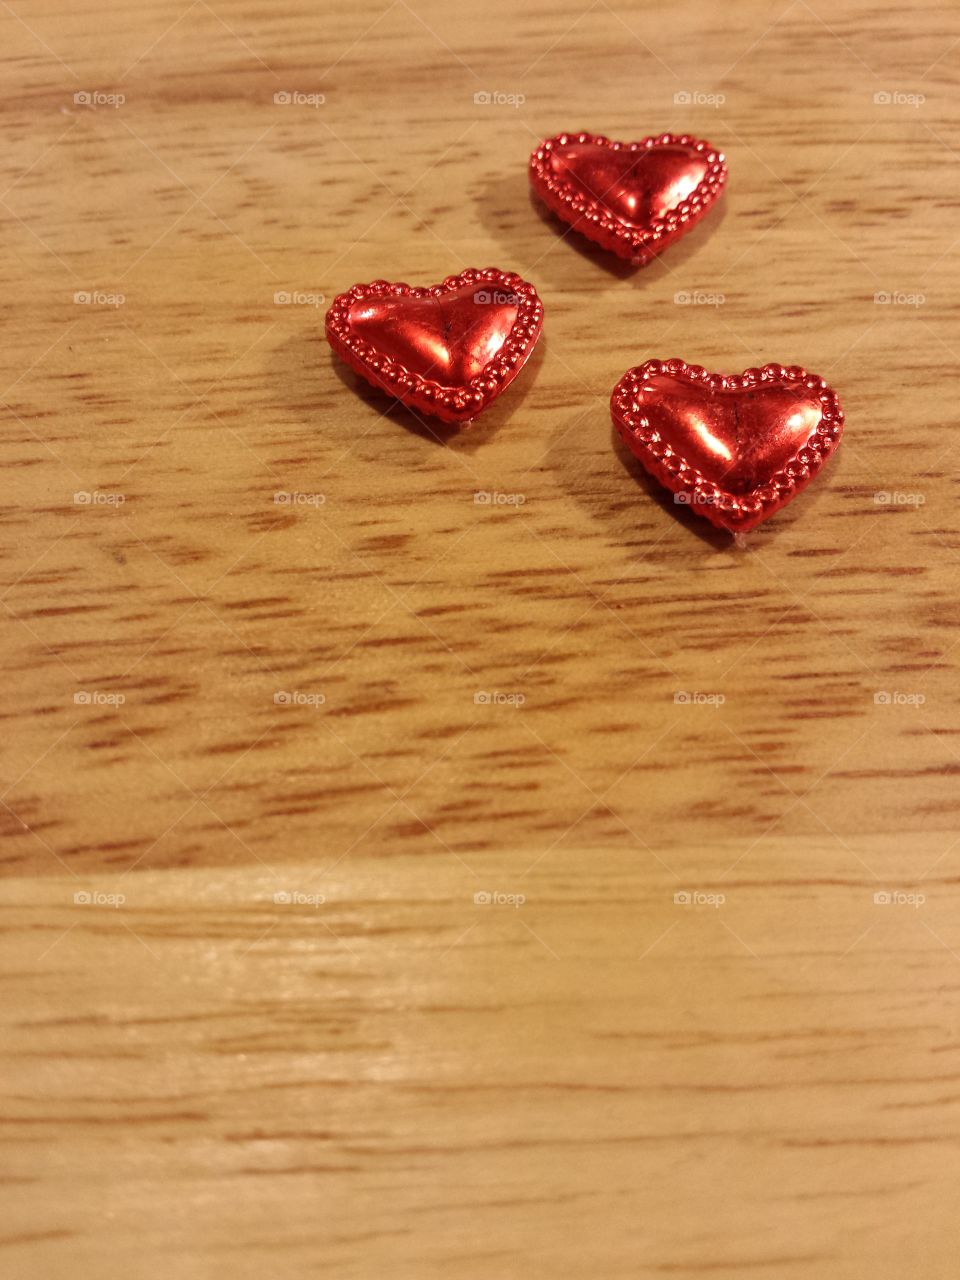 shiny red hearts on wooden background